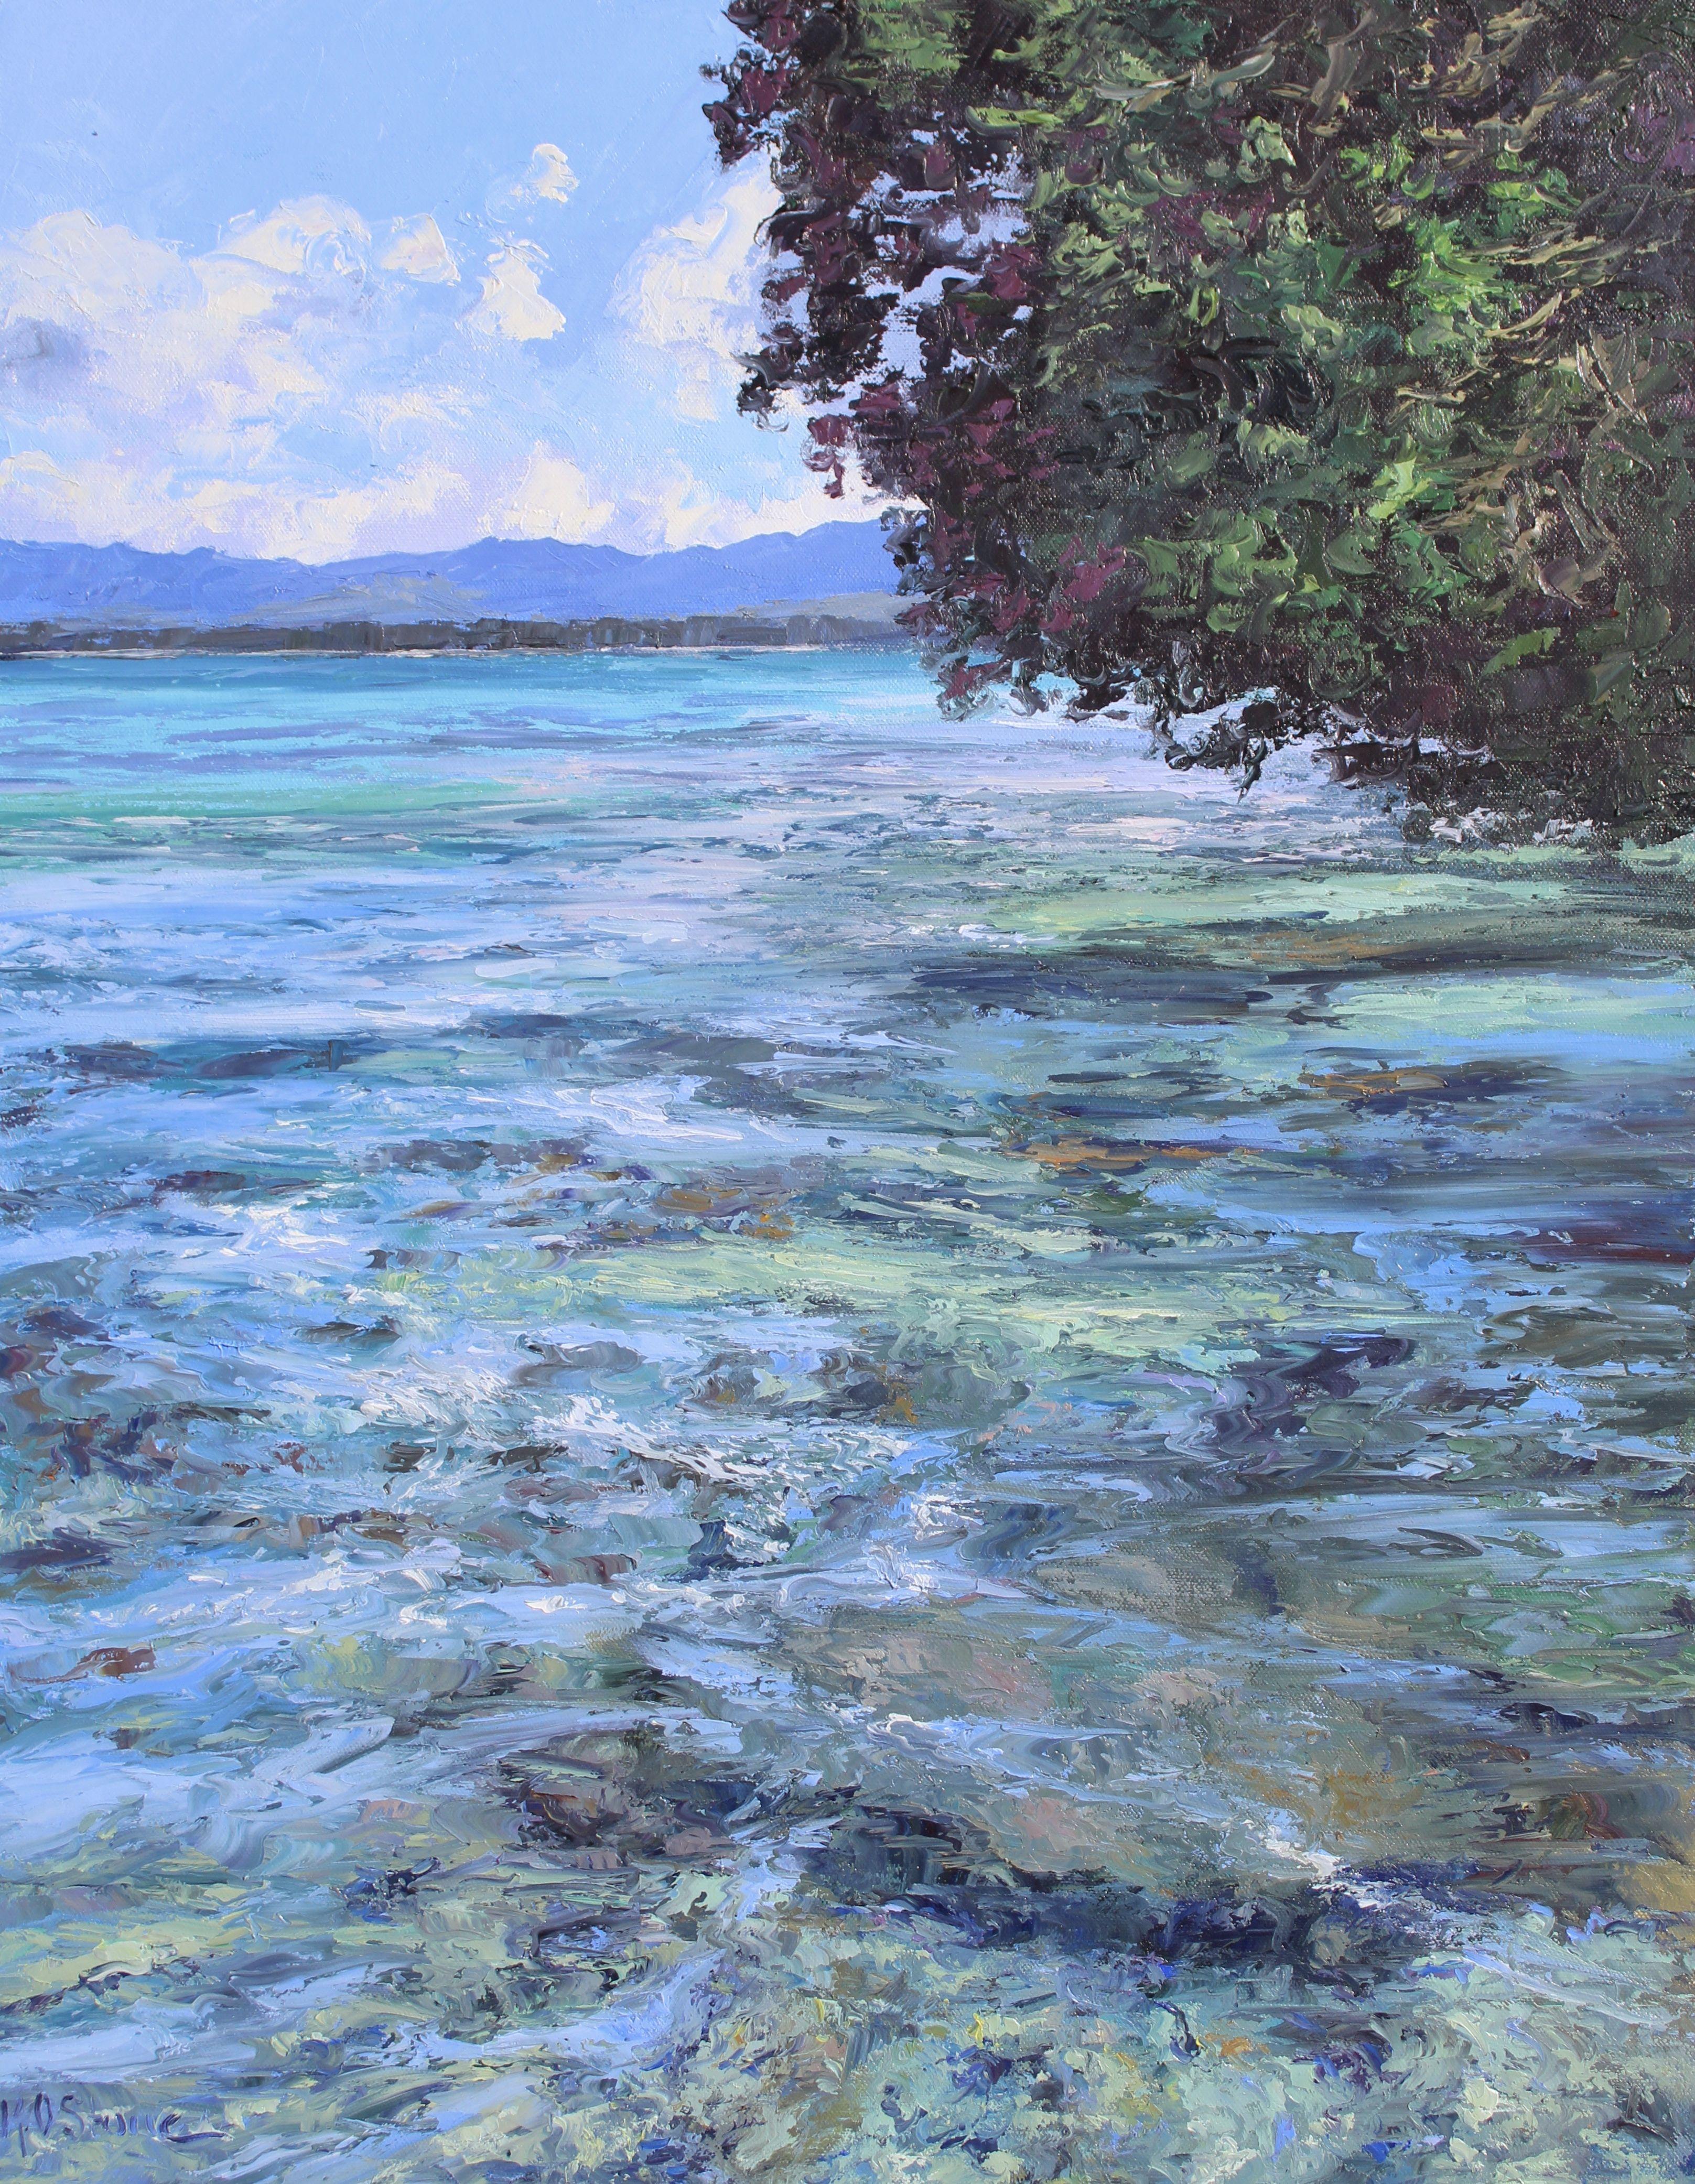 An original palette knife oil painting of a sunny summer day in New Zealand.  The water surrounding New Zealand  is the most beautiful color of turquoise.   I have spent many happy days painting along the coastline of this lovely country.  This